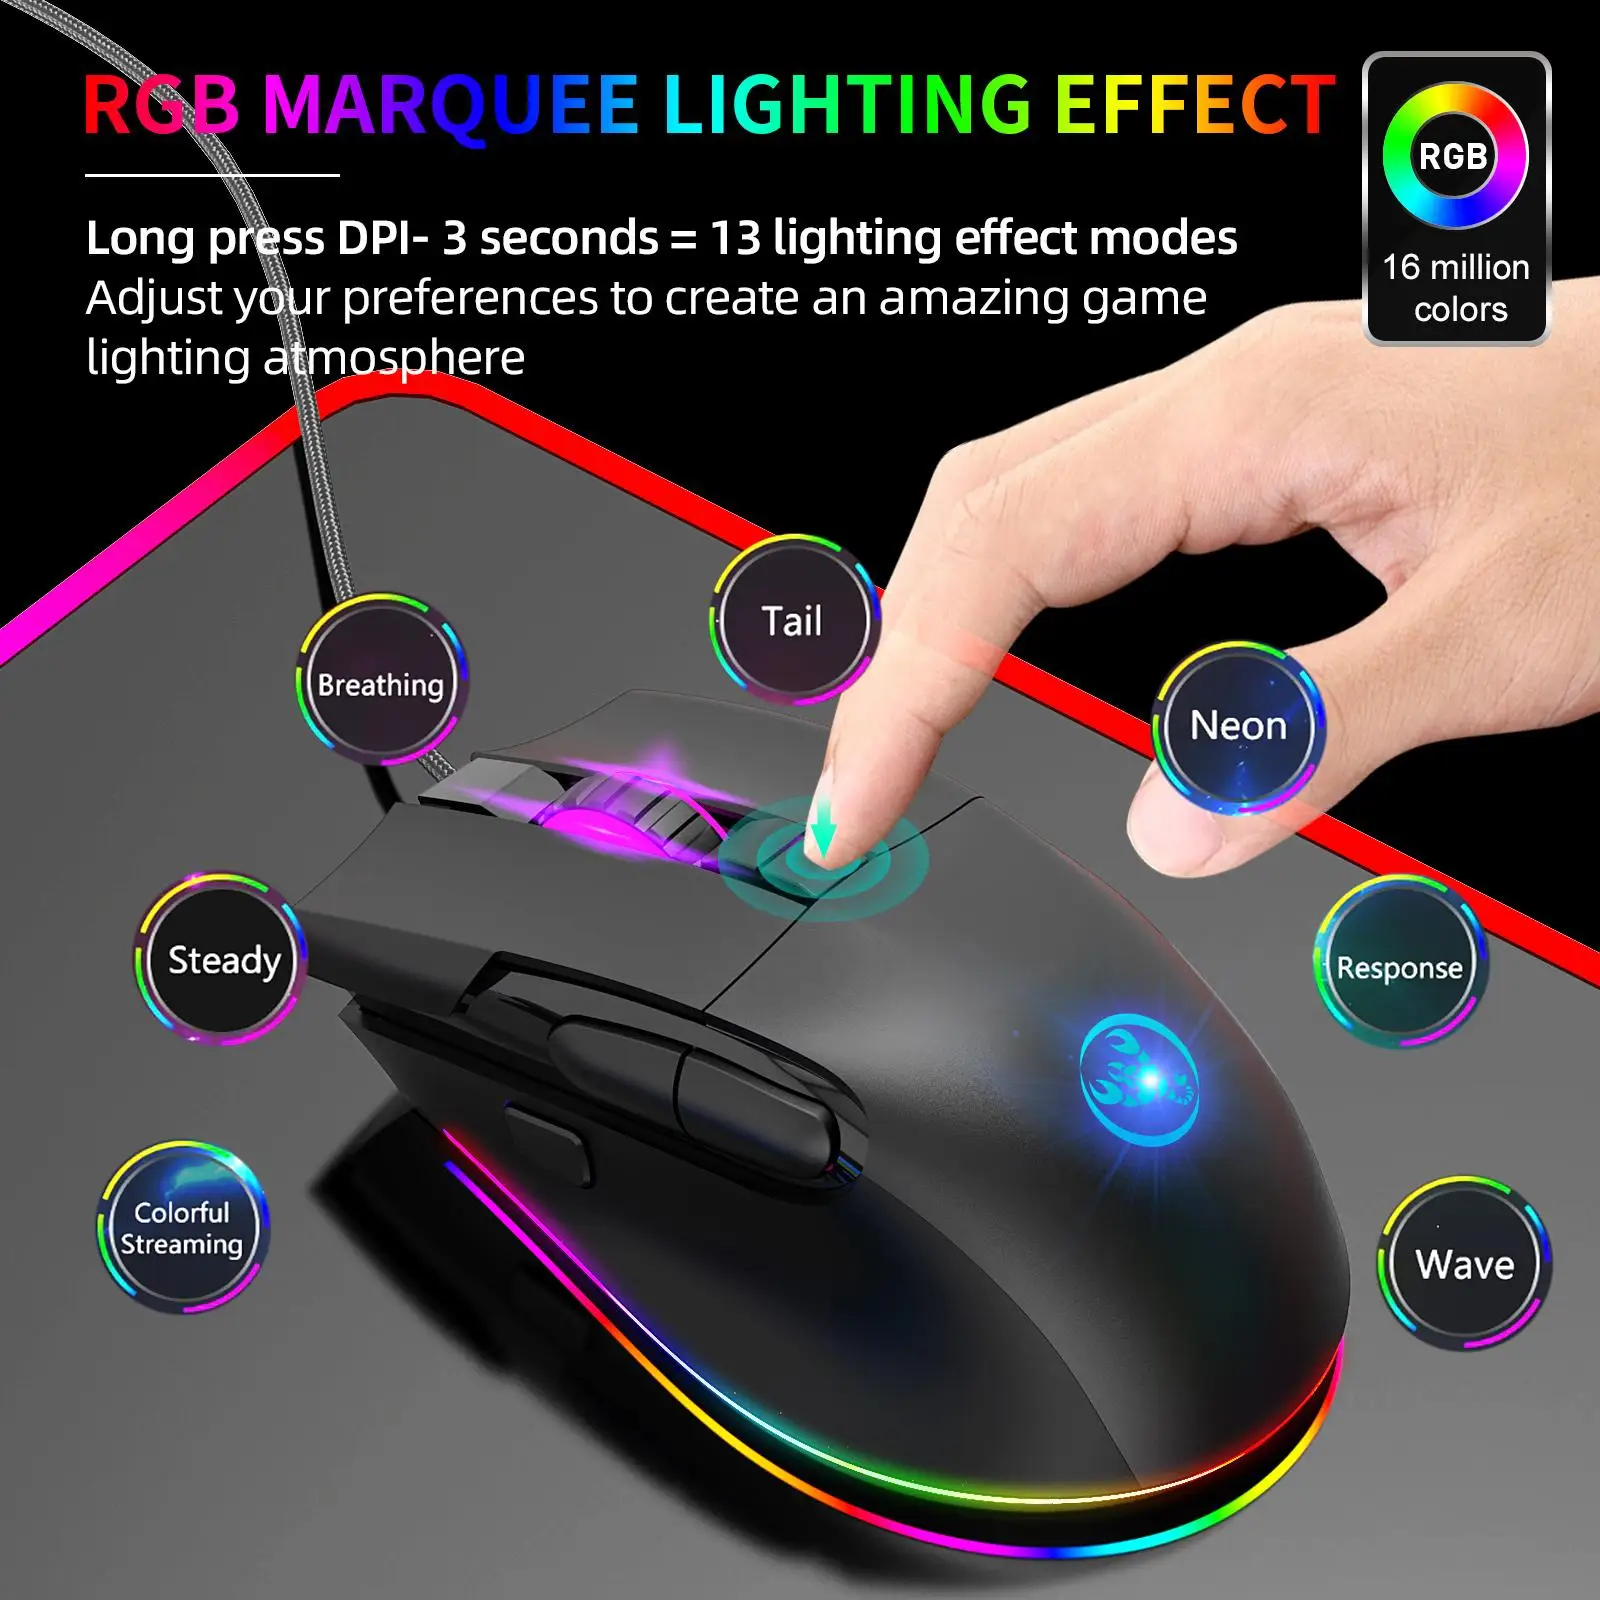 8D Wired Gaming Mouse Fire Button 13 RGB Lighting Modes Adjustable 7200 DPI Ergonomic 8 Buttons Computer Mice for Laptop Desktop